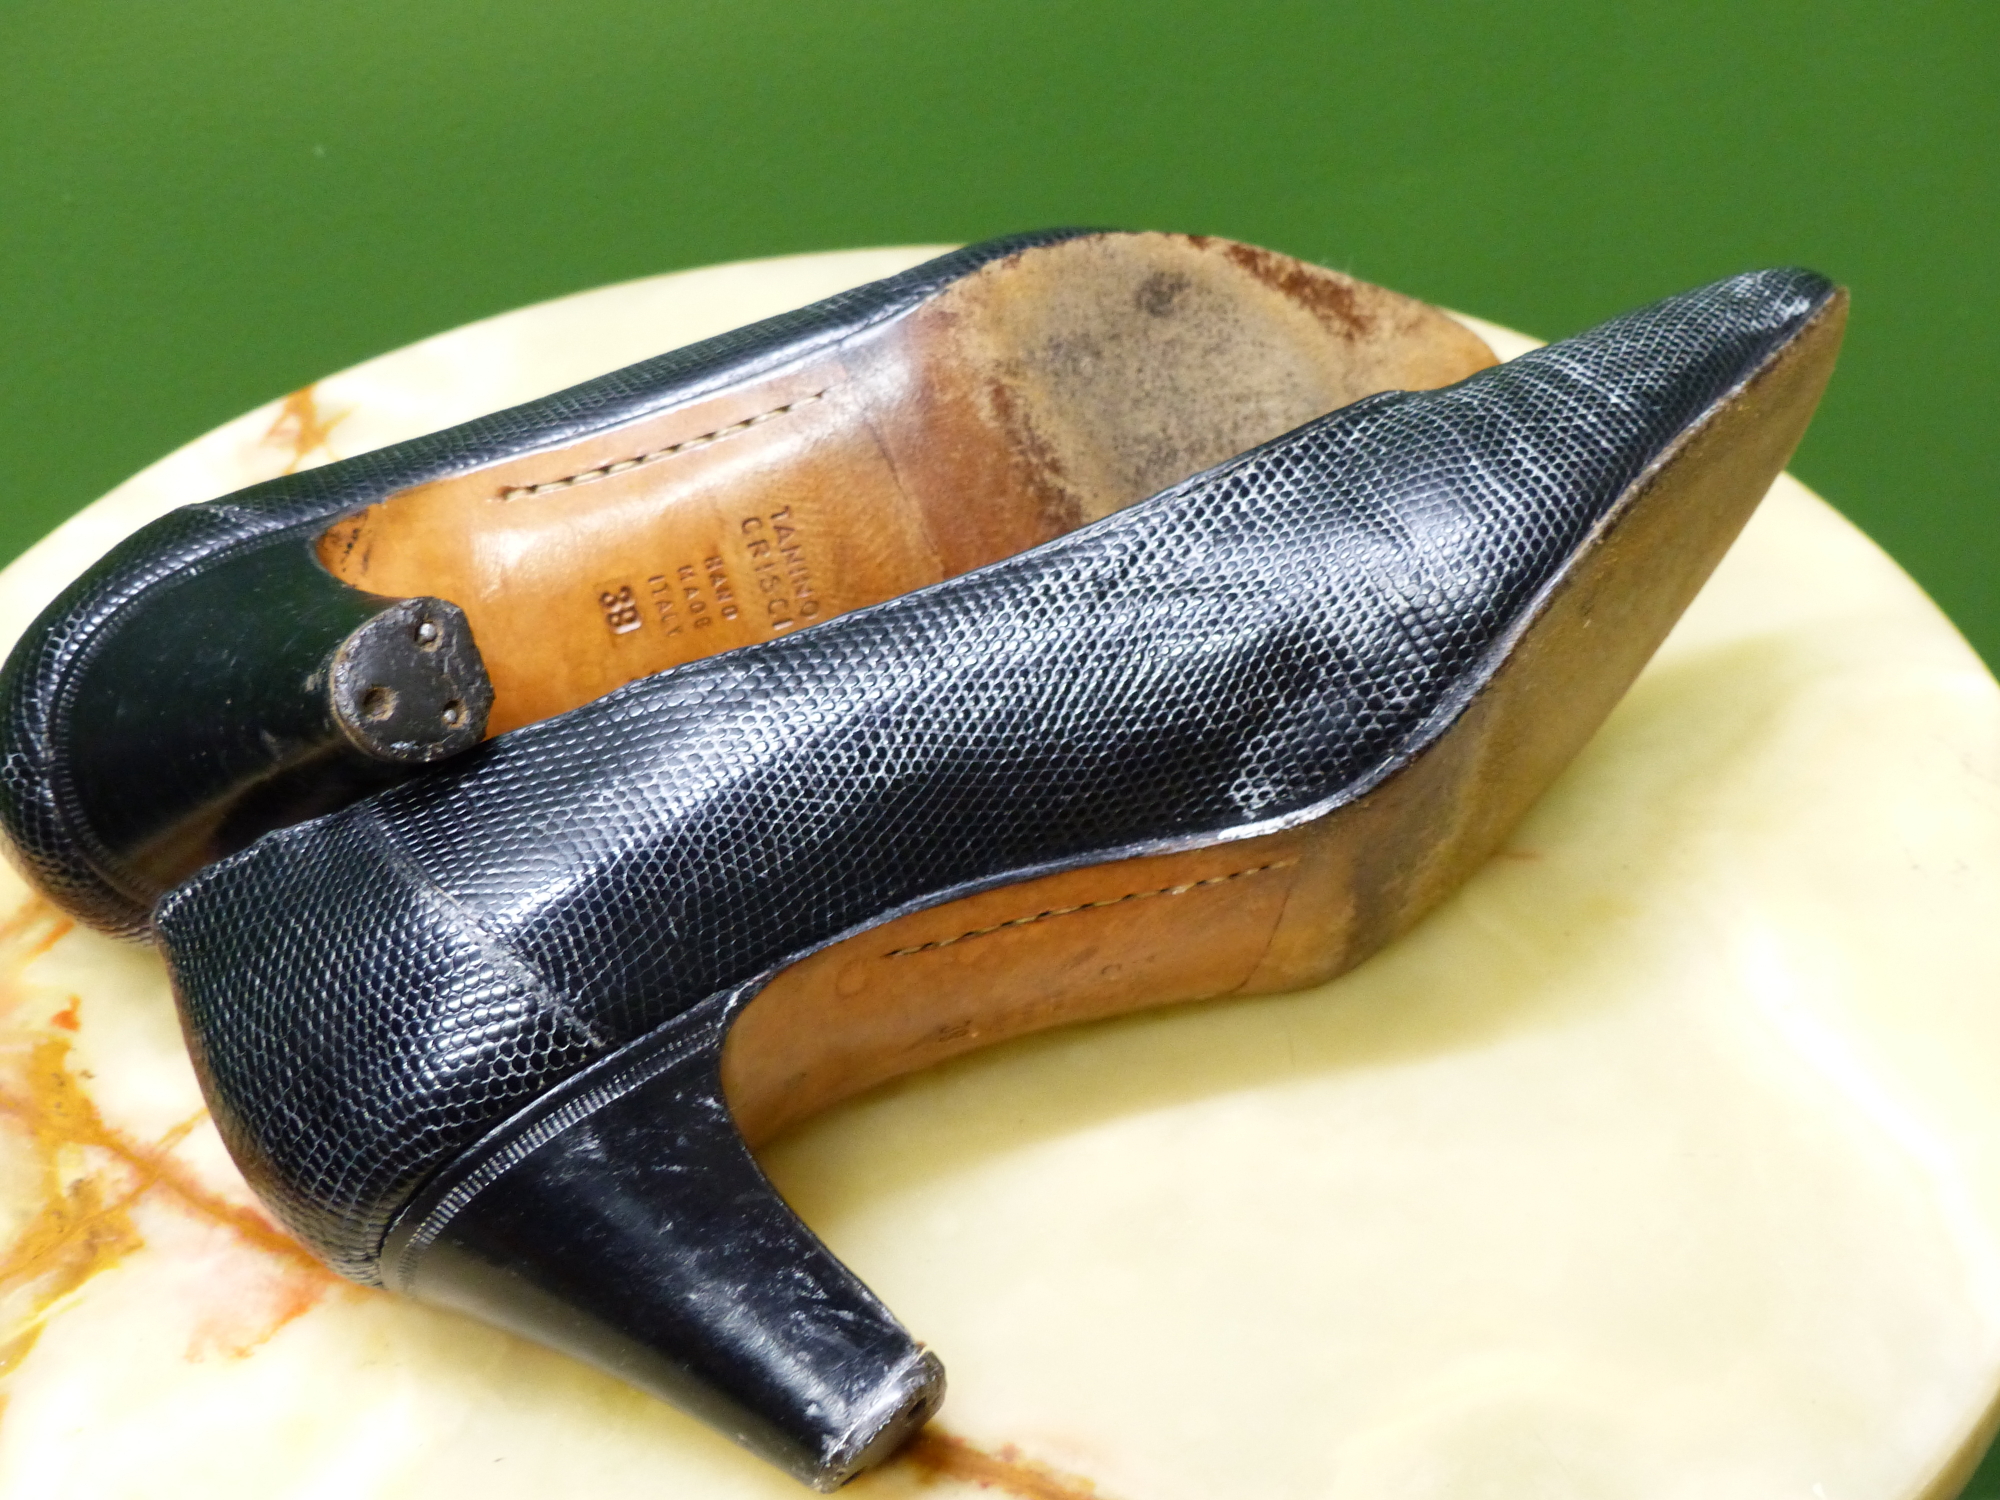 SHOES. TWO PAIRS TANINO CRISCI BLACK HEALS EUR SIZE 39. BLACK LOAFERS EUR SIZE 39. - Image 10 of 11